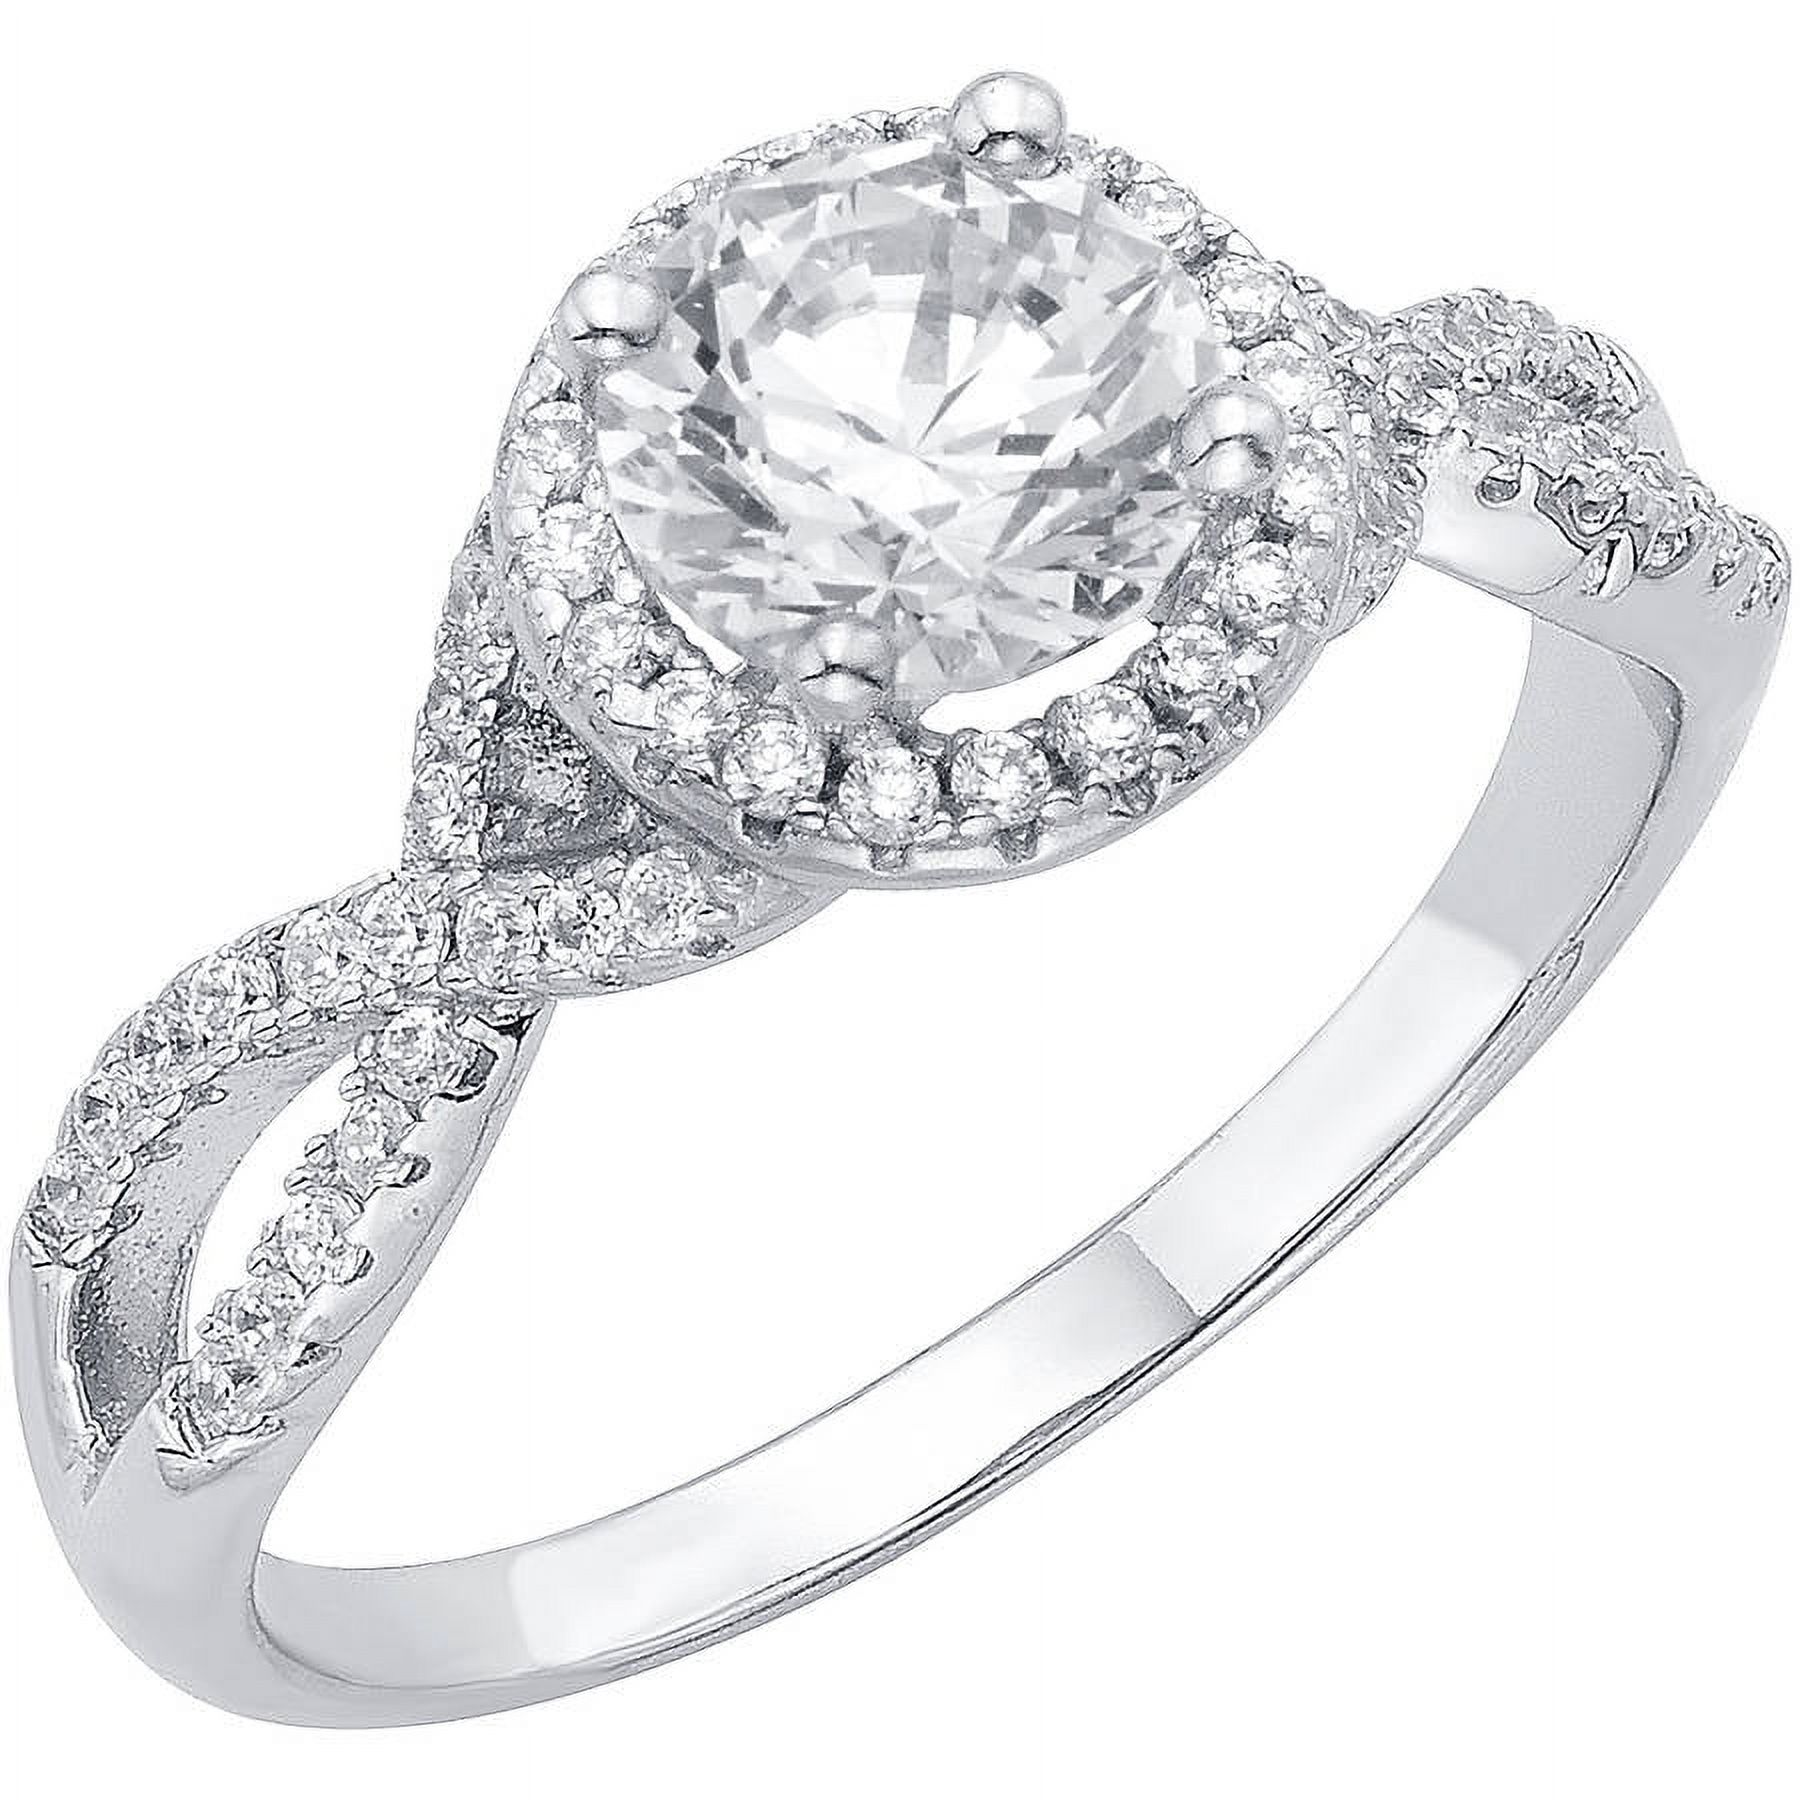 1/2 Carat T.G.W. Australian Crystal and CZ Sterling Silver Engagement Ring - image 1 of 3